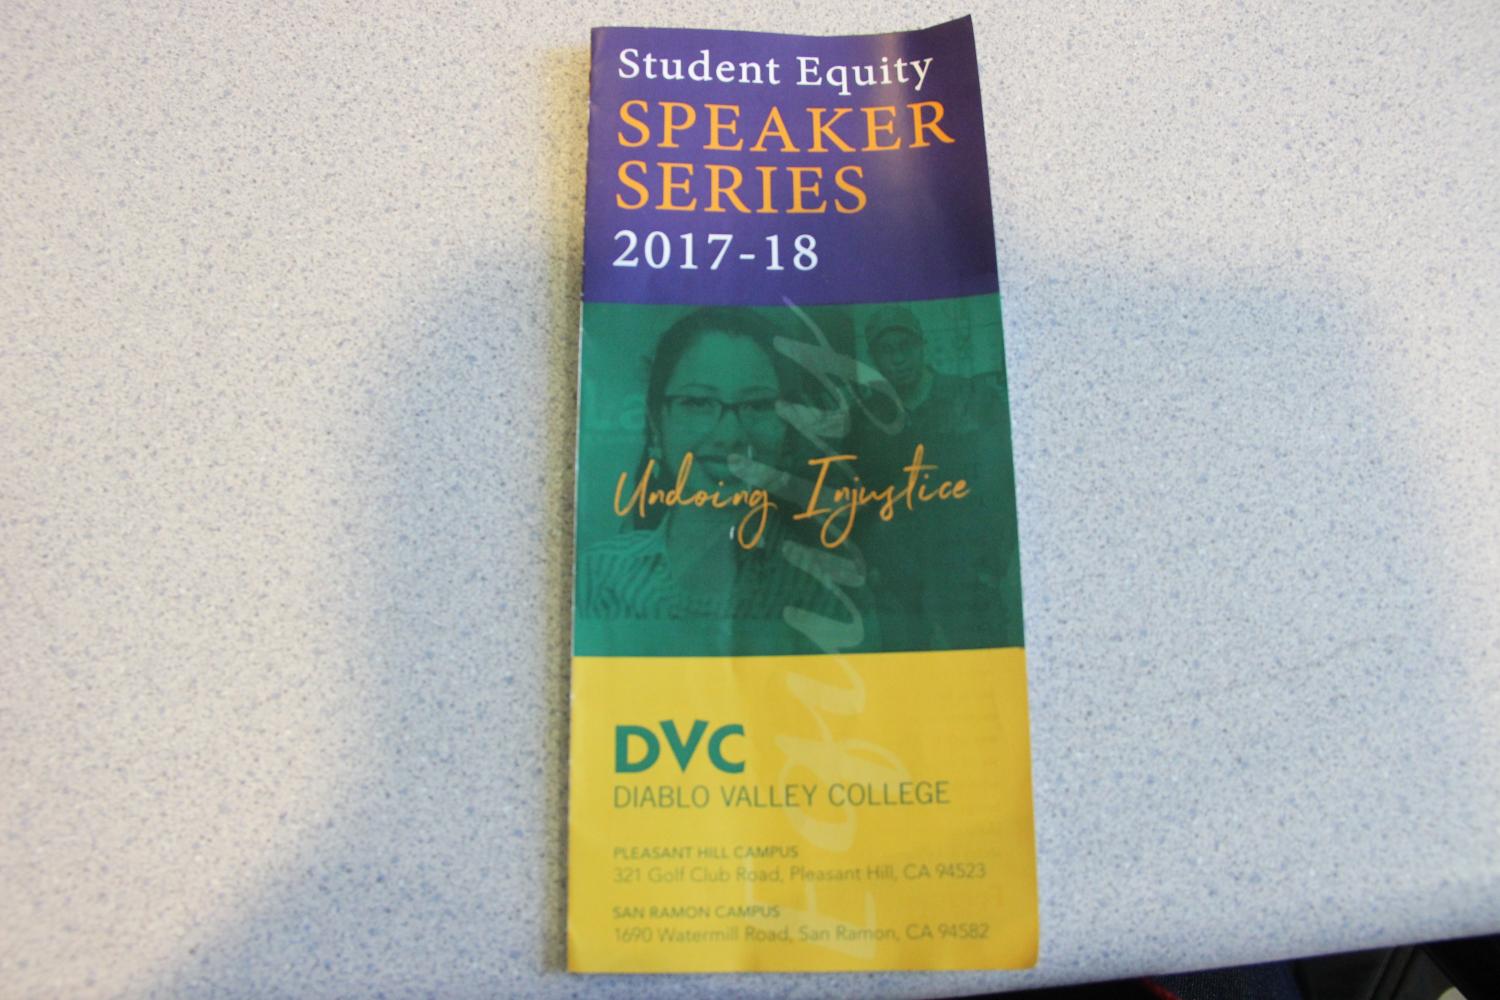 Pick up a Speaker Series pamphlet at any DVC newsstand!